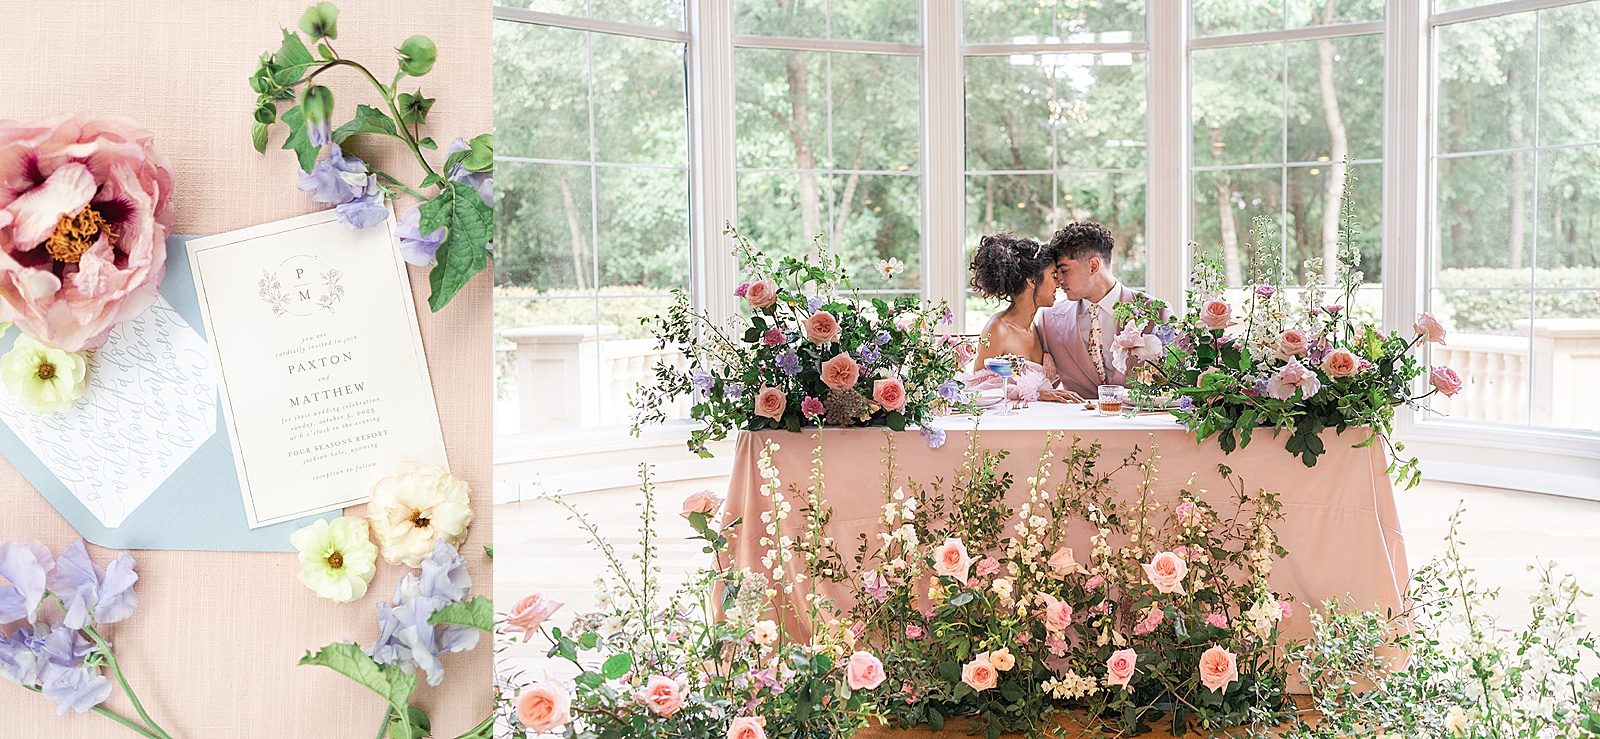 Blush-toned floral installations and details by Houston’s Best Wedding Photographers